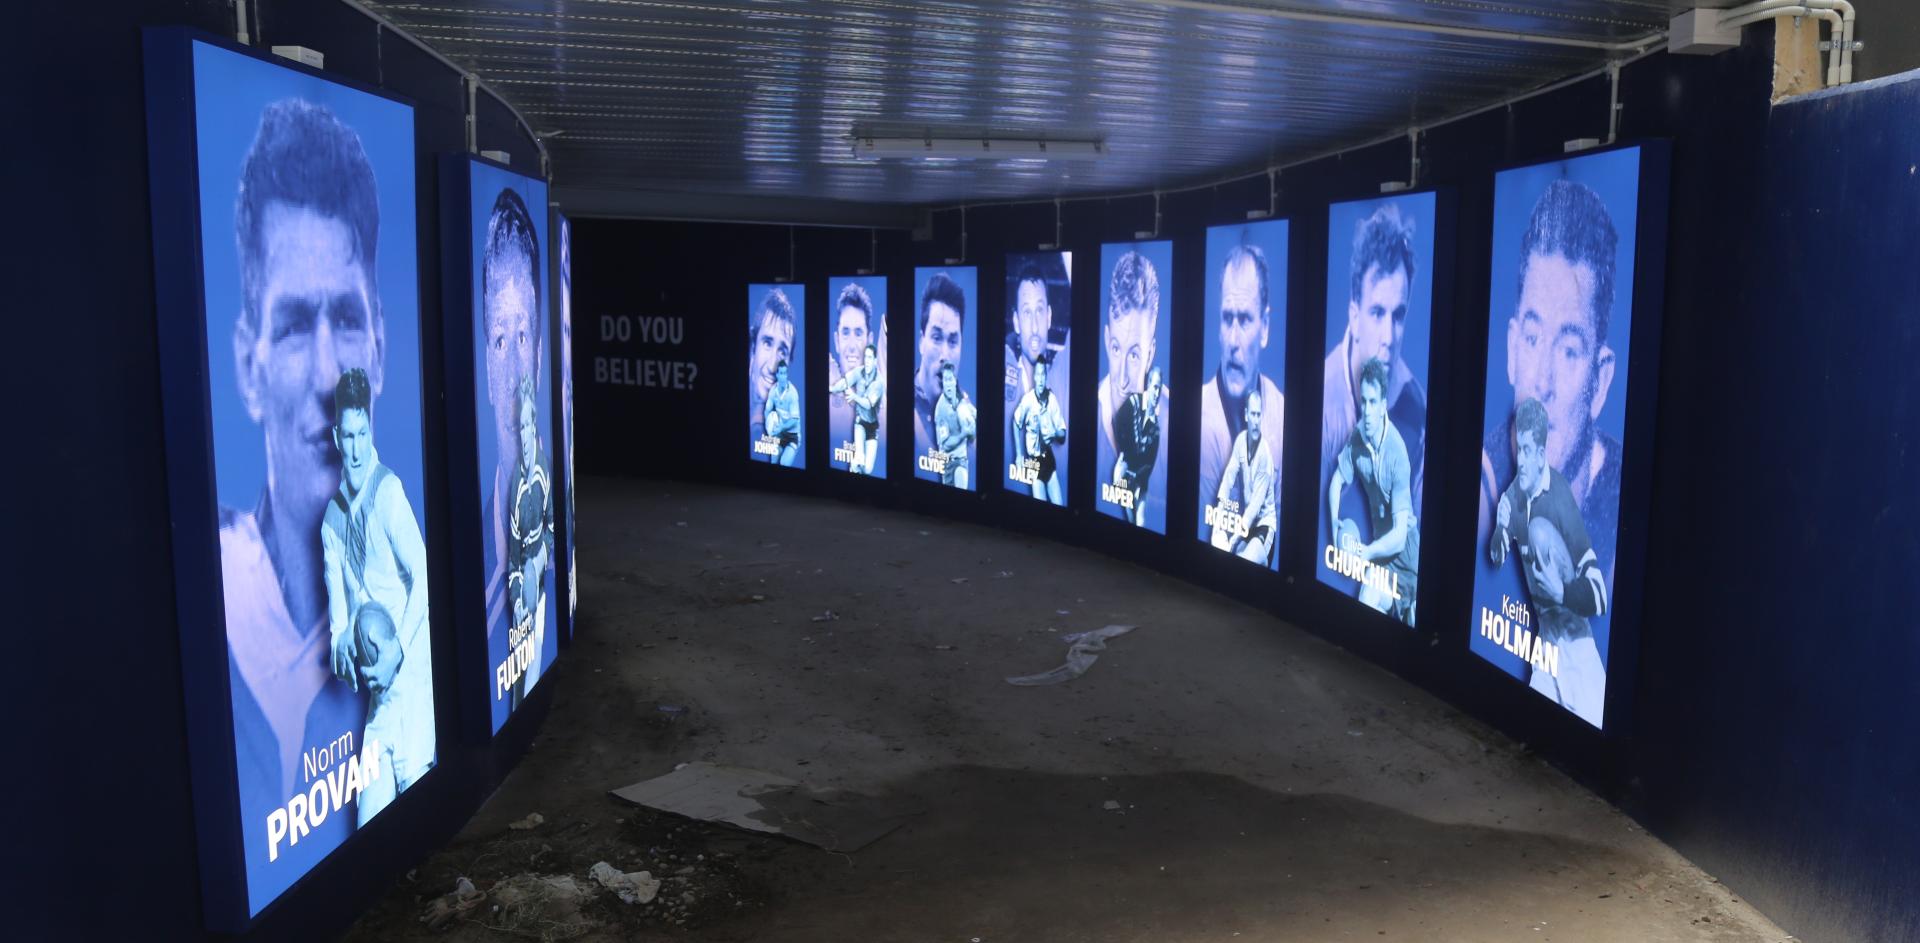 NSW Rugby players displayed on screens in hallway